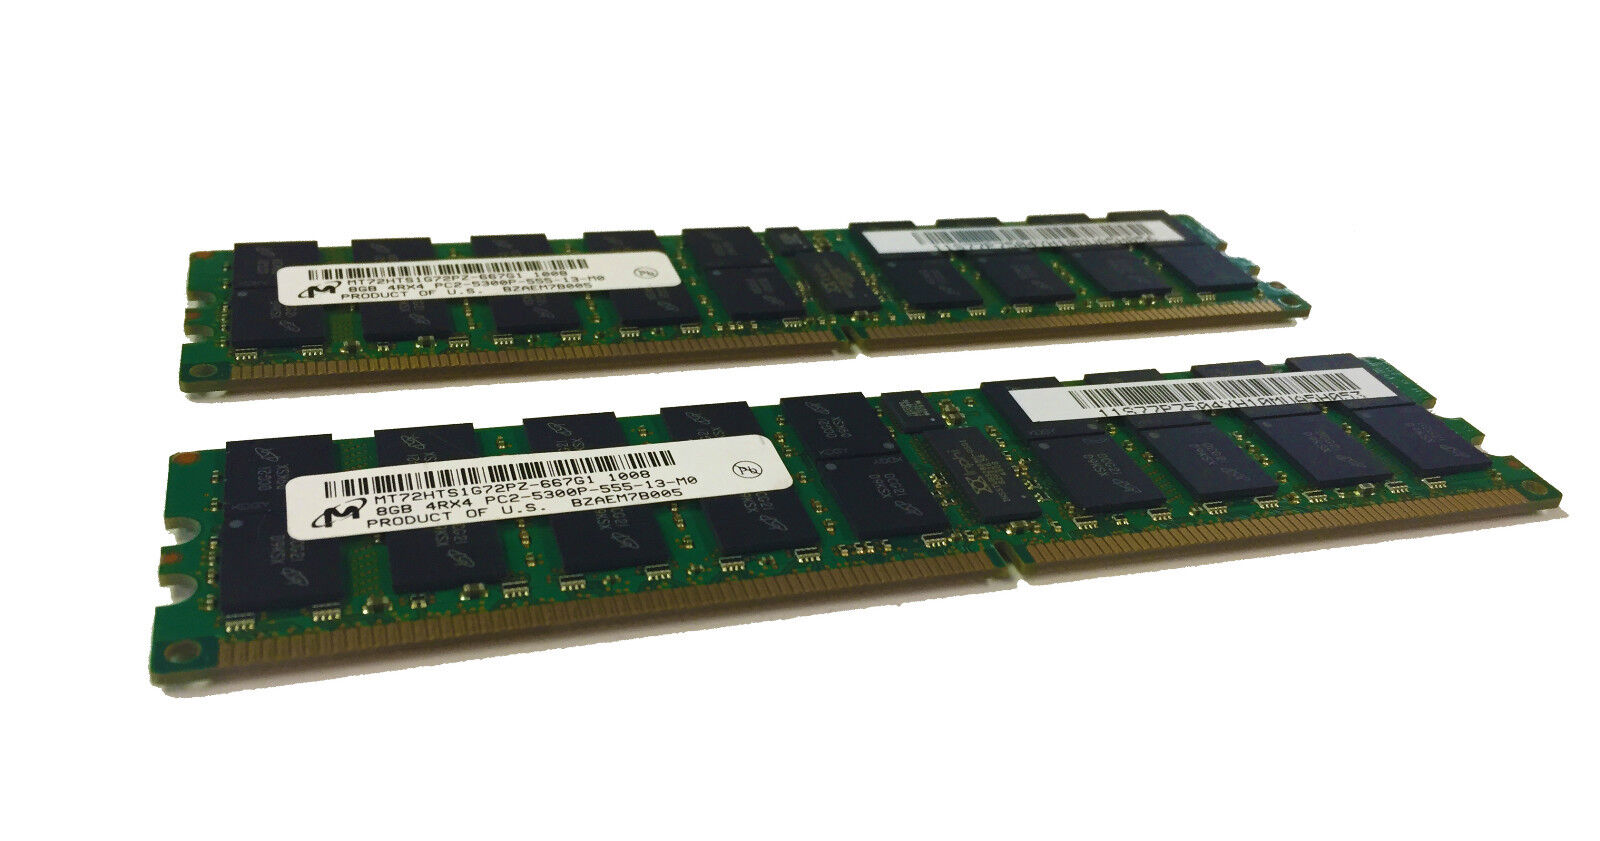 IBM FC 4524 16384MB (2x 8192MB, 77P7504) 400MHz (1Gb) Stacked RDIMMs, p&i series